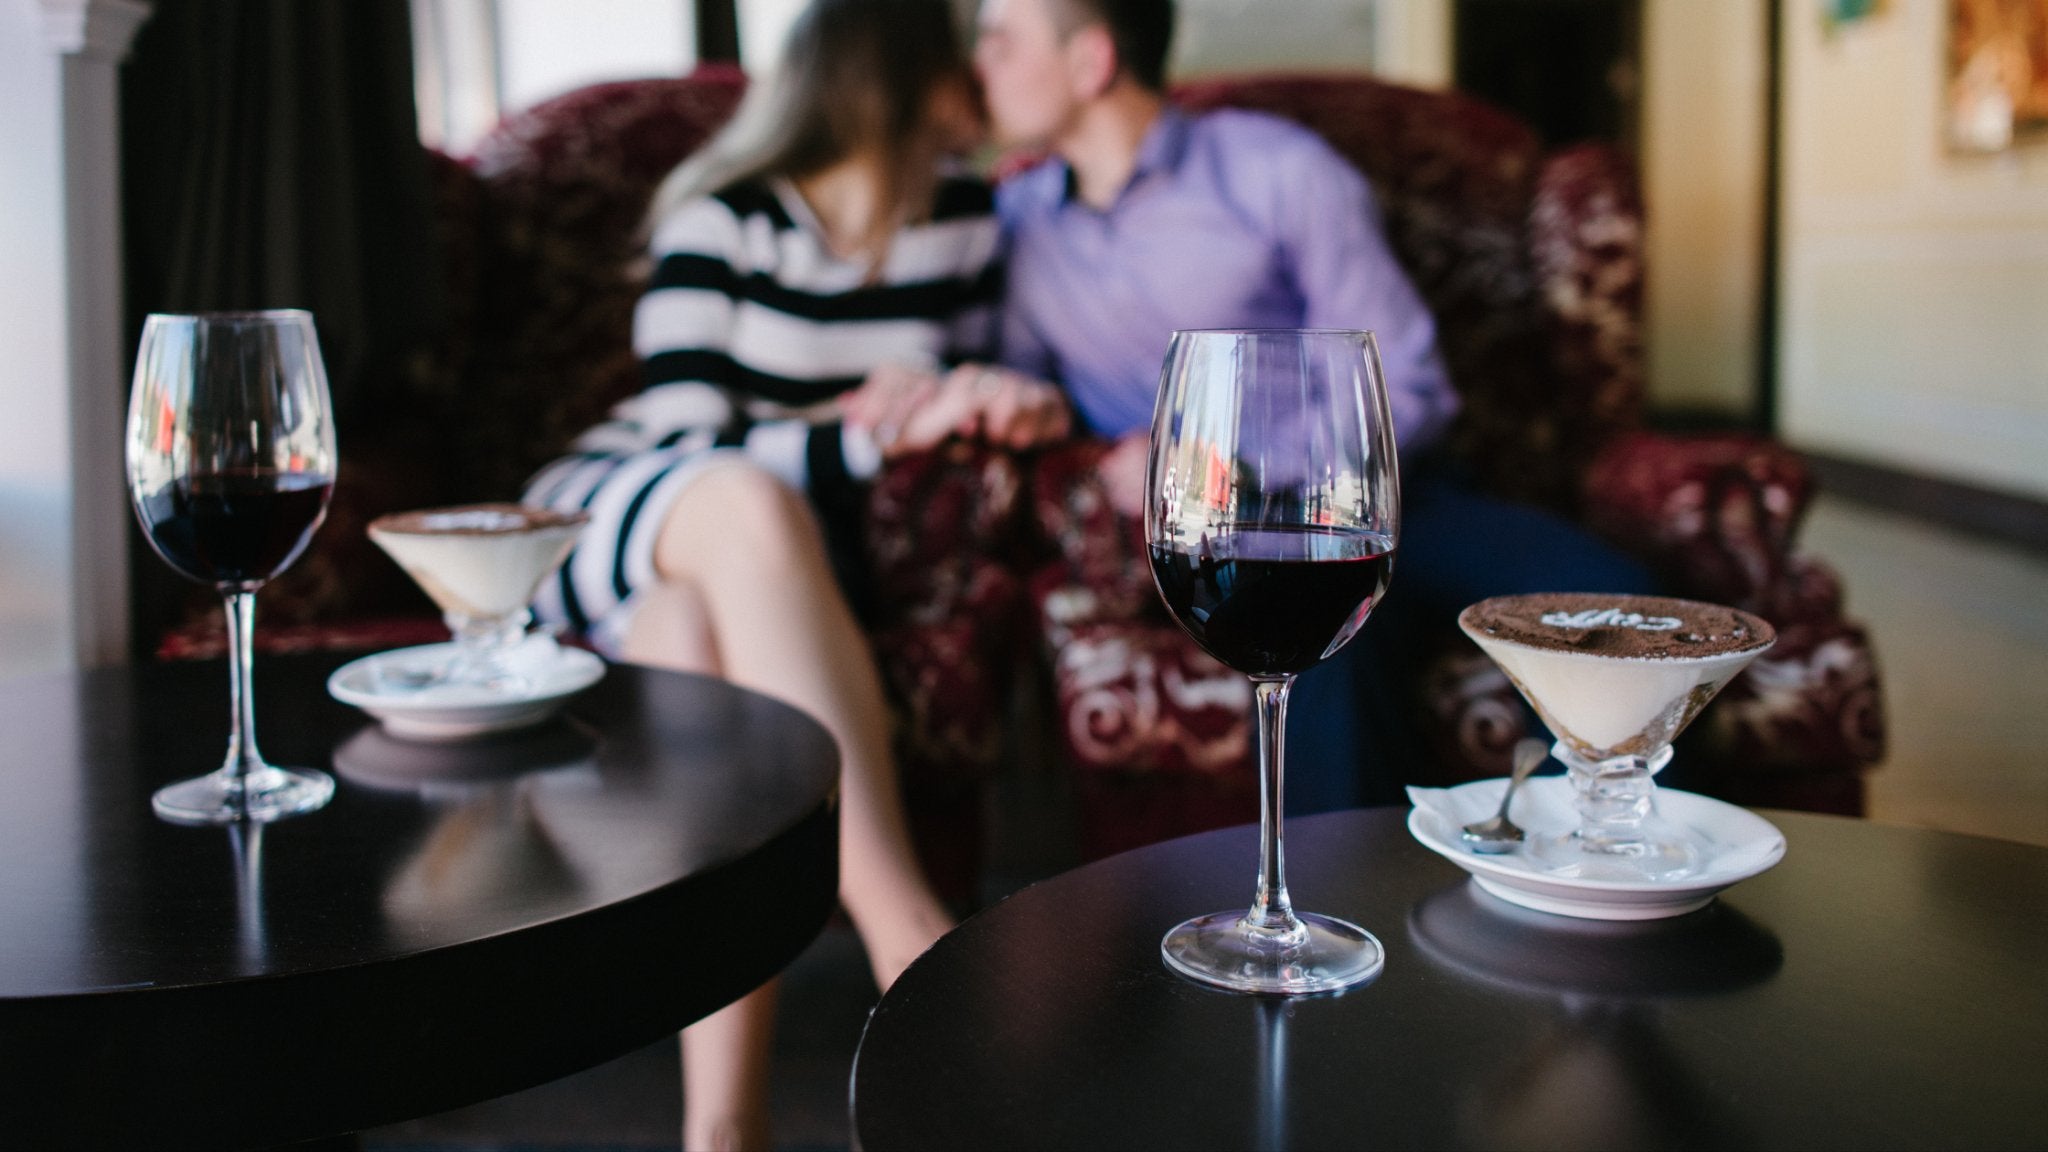 How-to-have-the-perfect-date-night-at-home The Bottle Club